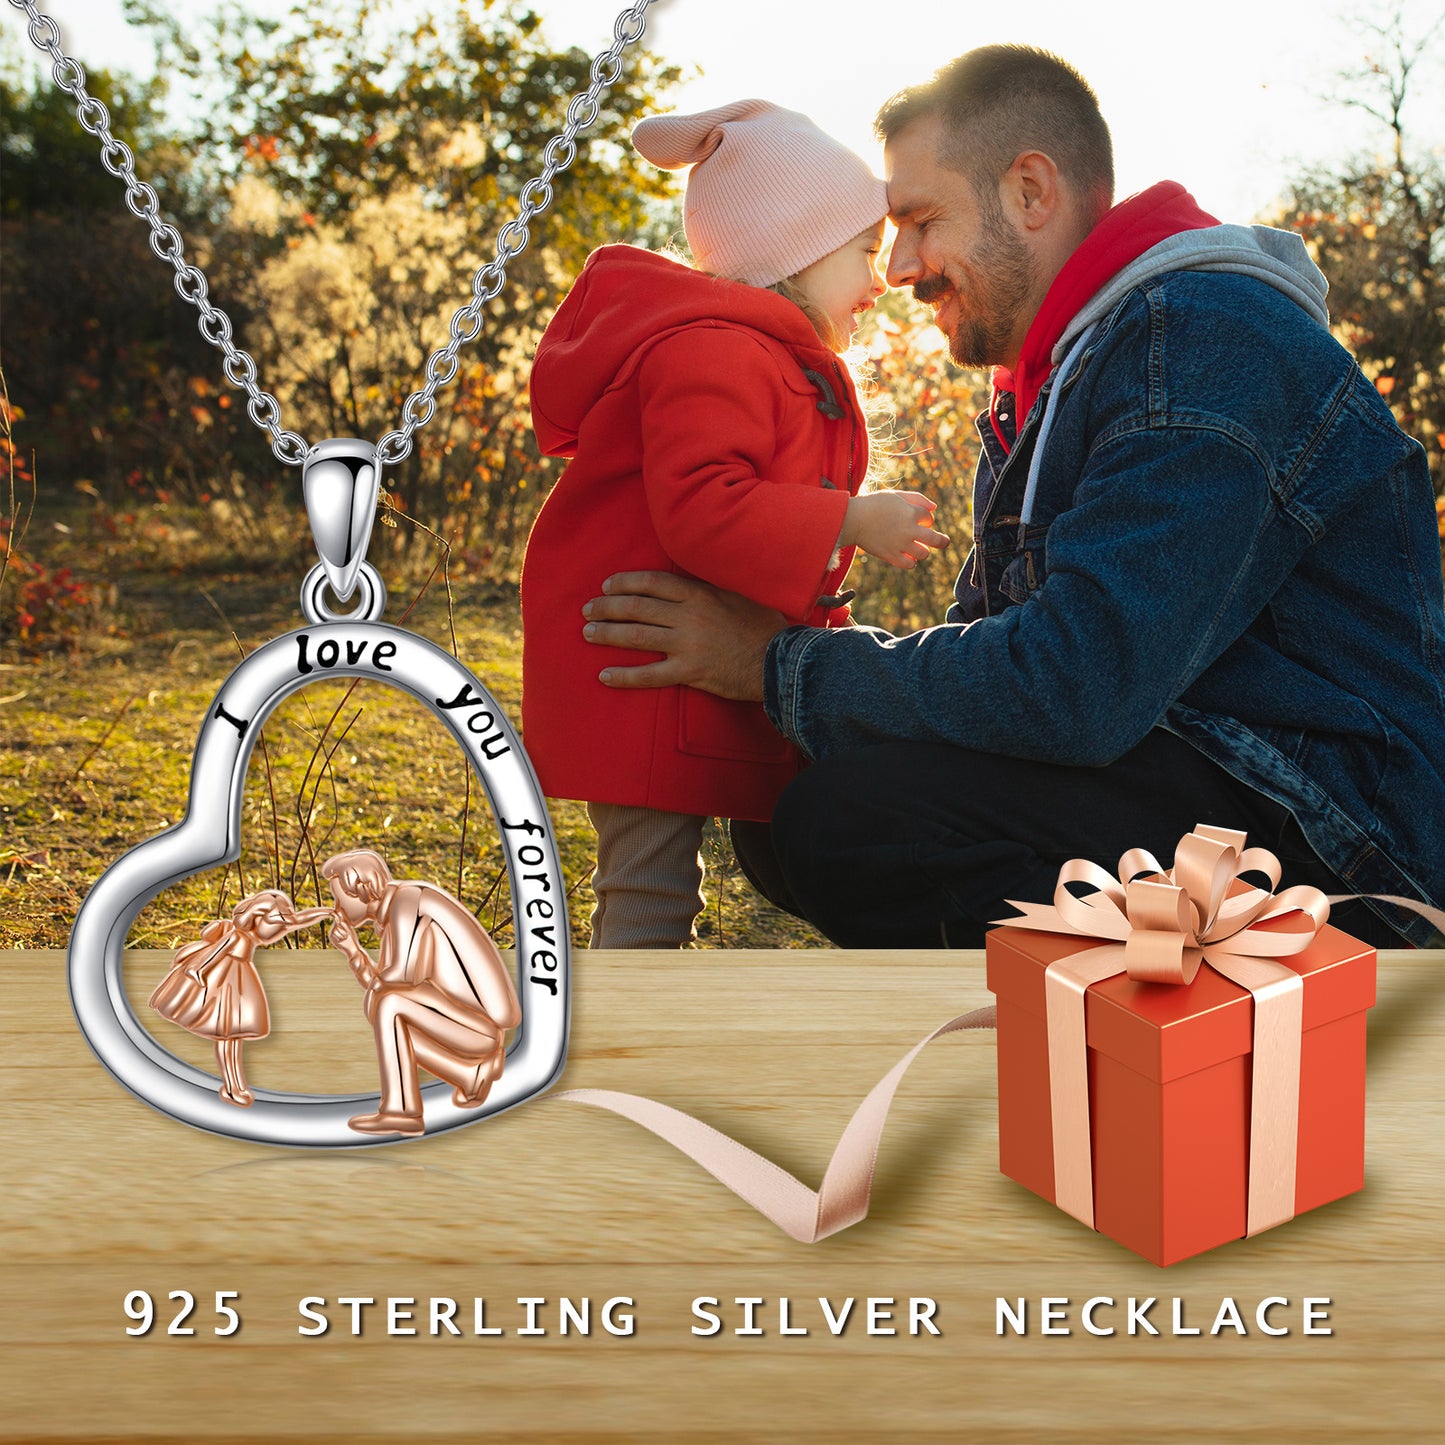 YFN S925 Sterling Silver Daughter Gift from Dad Daughter Heart Pendant Necklace I Love You Forever Jewelry (US only)